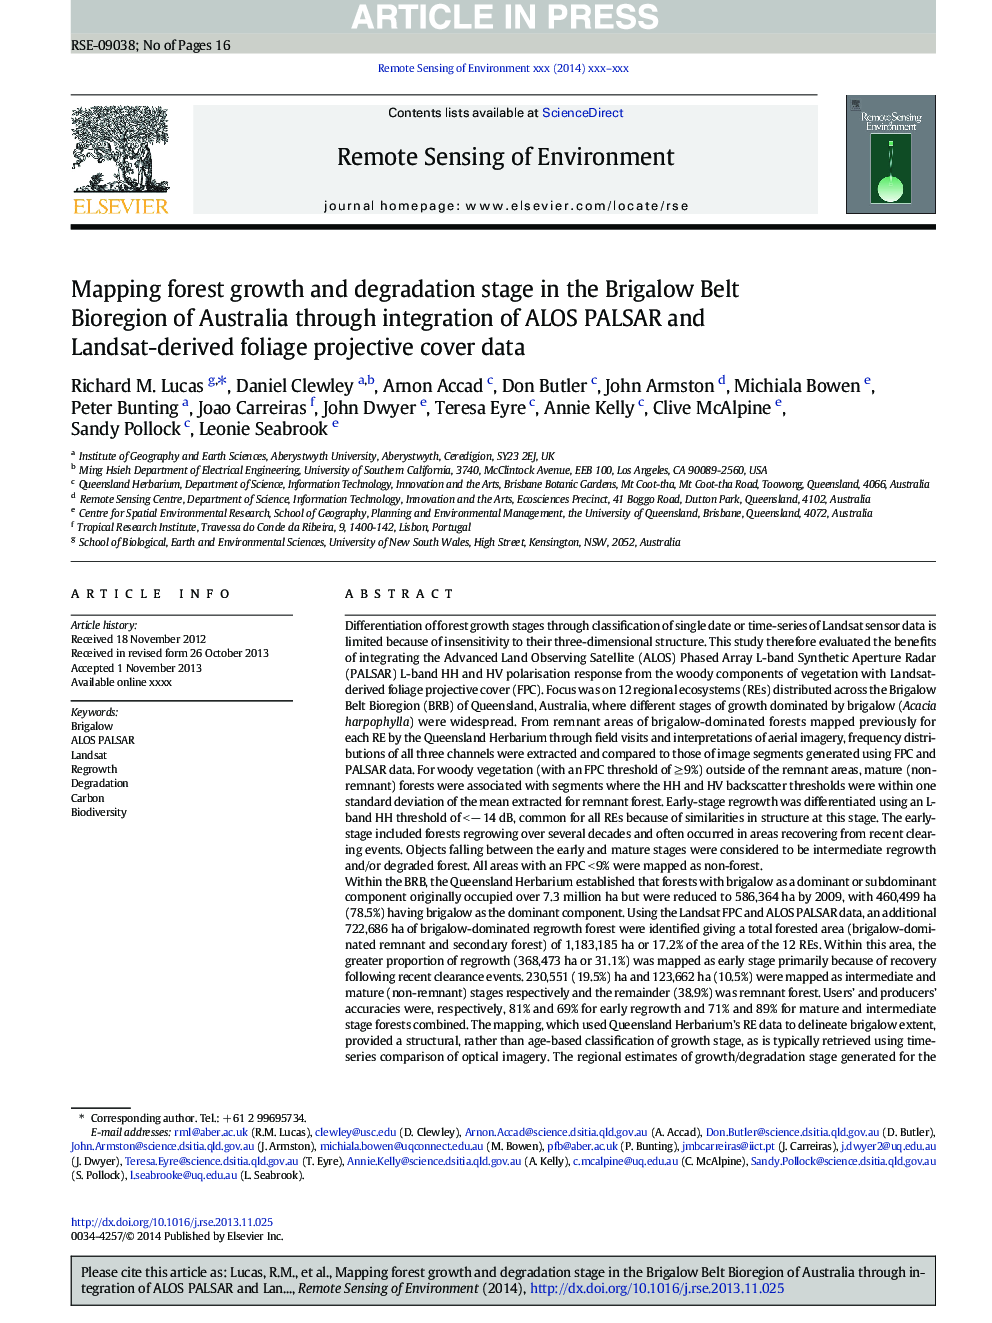 Mapping forest growth and degradation stage in the Brigalow Belt Bioregion of Australia through integration of ALOS PALSAR and Landsat-derived foliage projective cover data